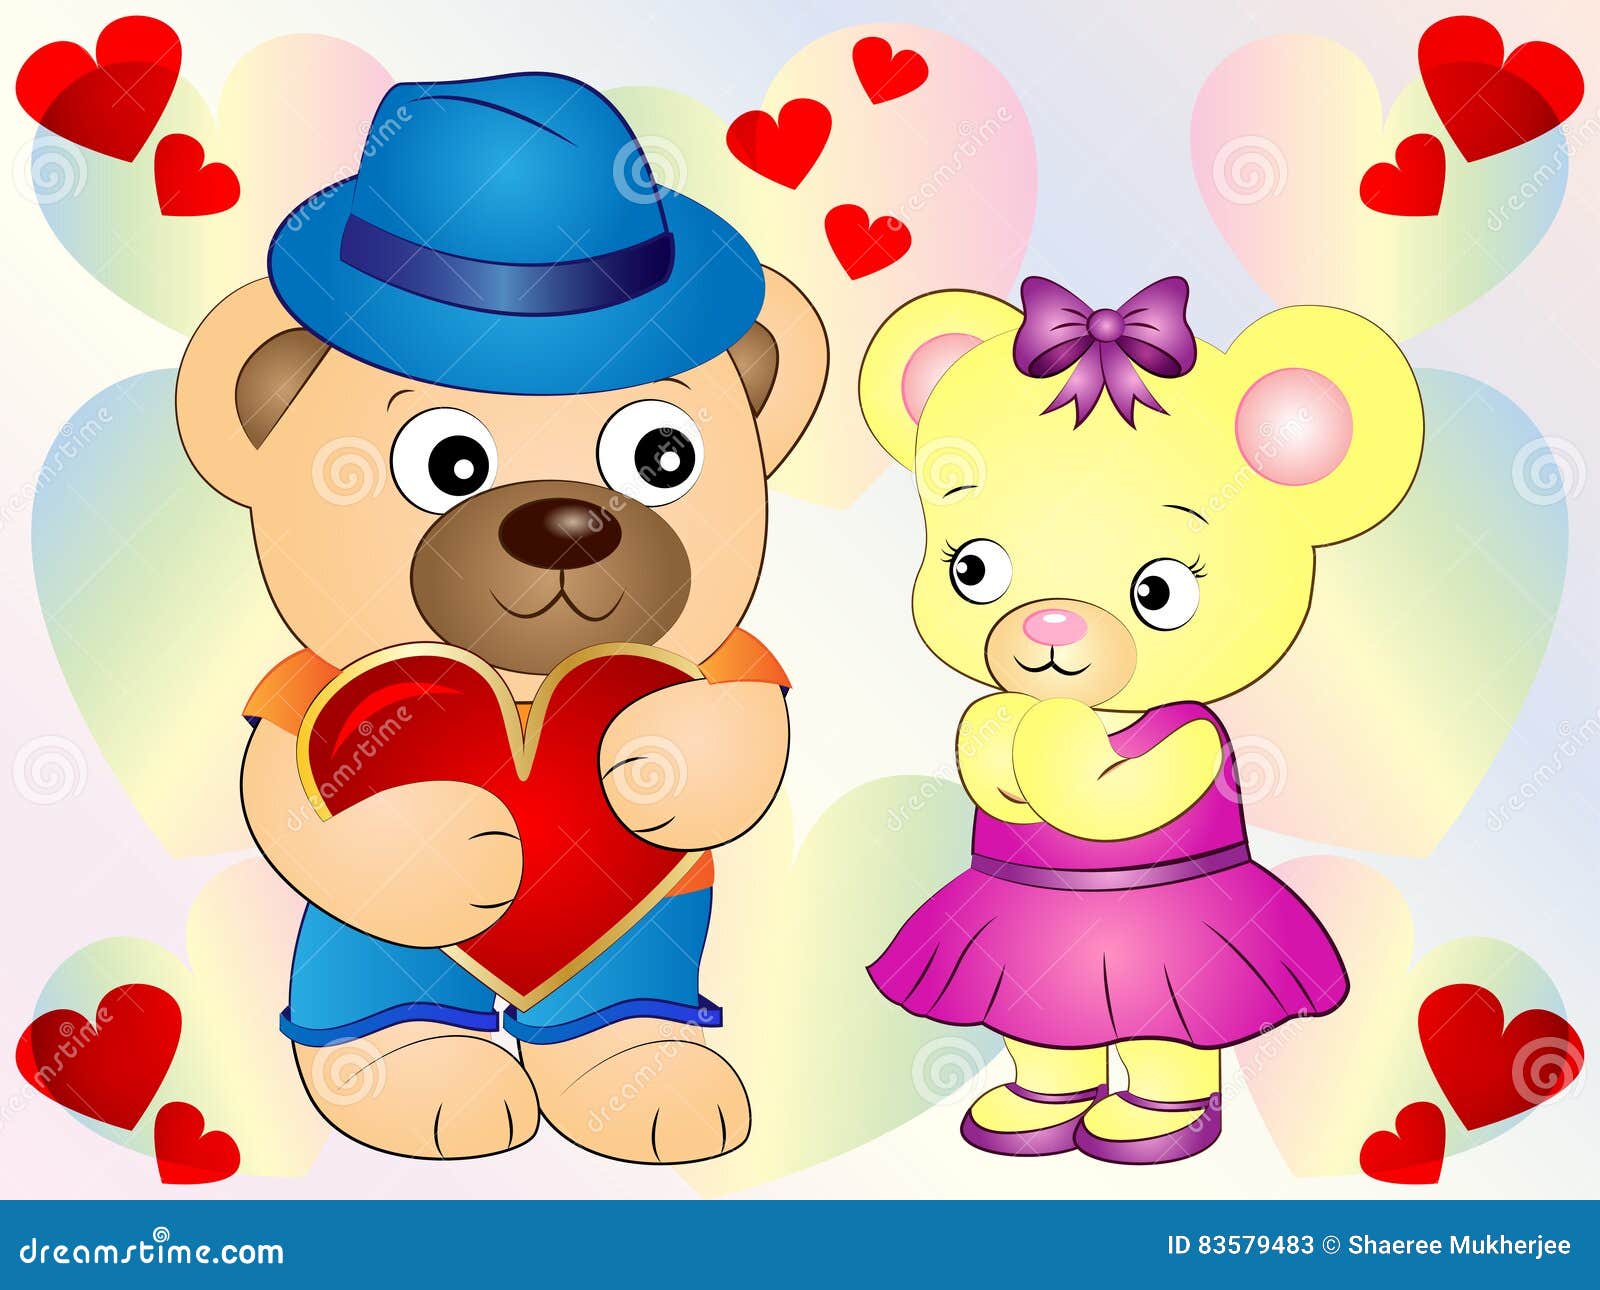 Unmatched Collection of Over 999 Teddy Bear Images with Love in ...